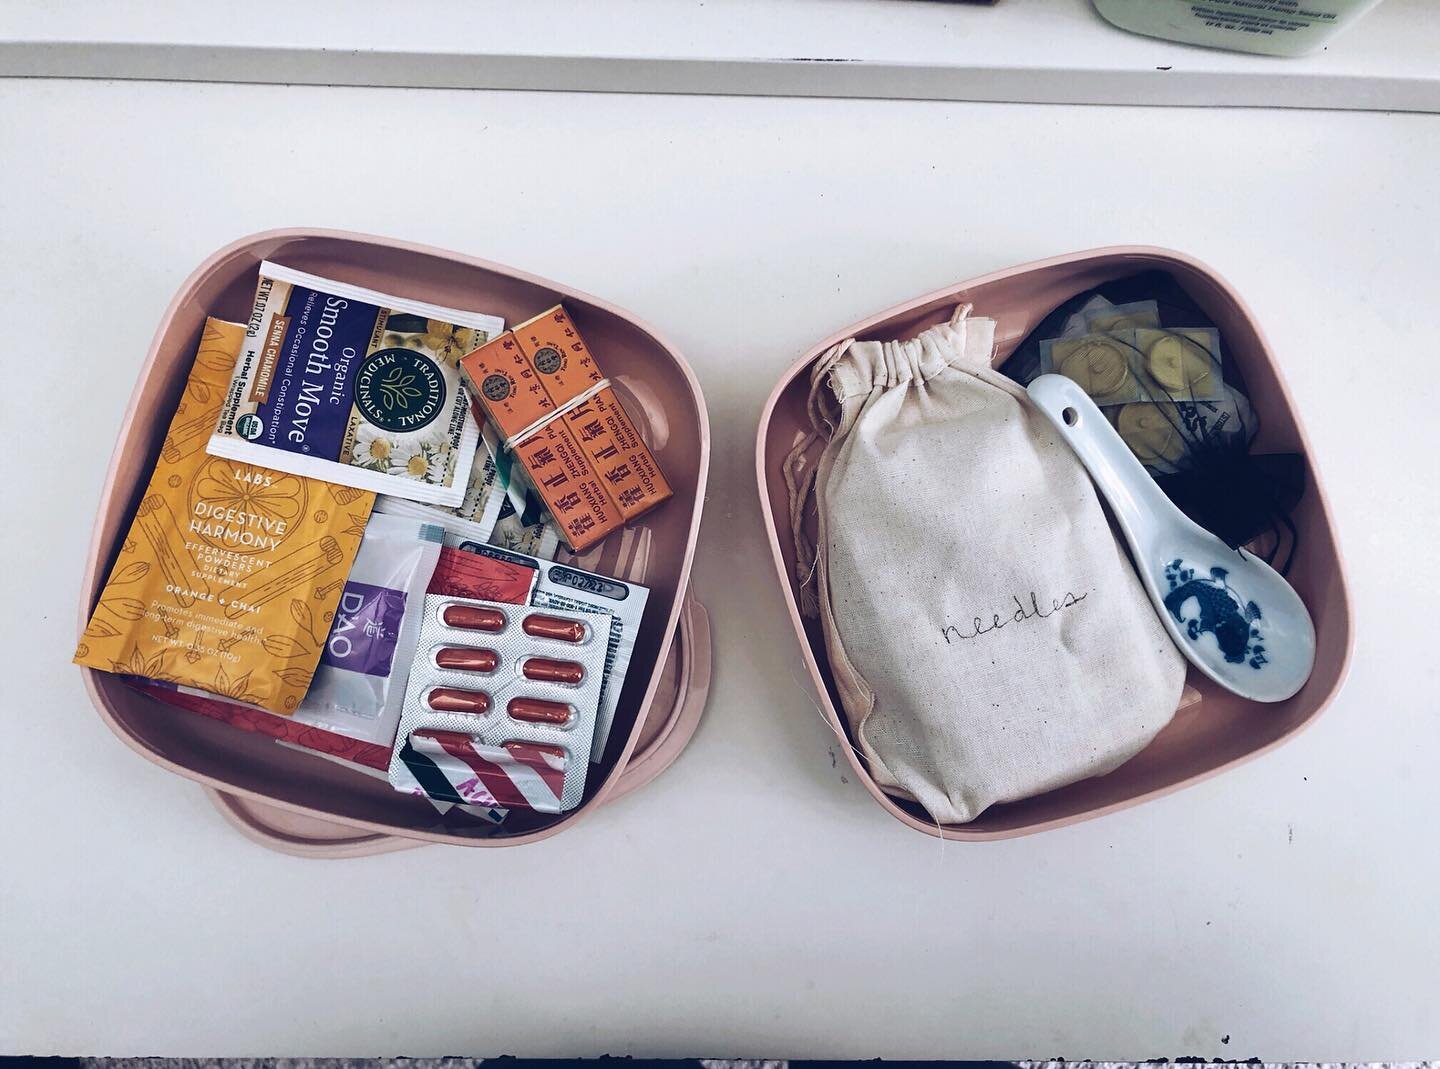 What started out as a cheapo lunchbox is now an acupuncture essentials kit 🙏🏼 

#body #health #bones #skeleton #skeletalsystem #healthmaintenance #cupping #cuppingtheray #firecups #firecupping #lovecups #lovecupping #cupmarks #cuppingmarks #massage